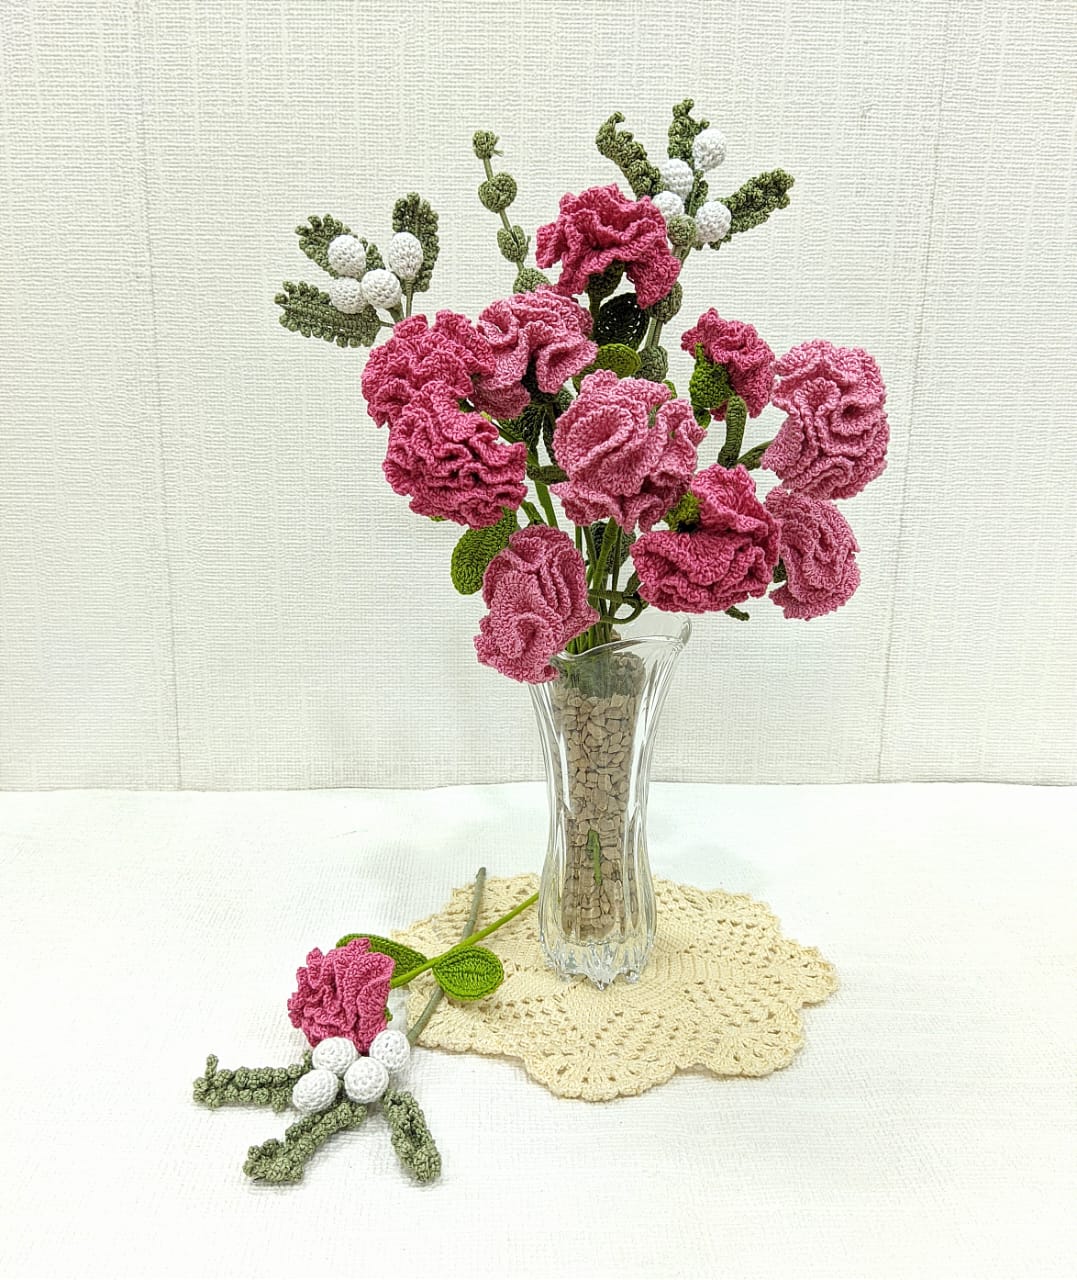 Vibrant Blooms: Colorful Handmade Crochet Carnations for Home